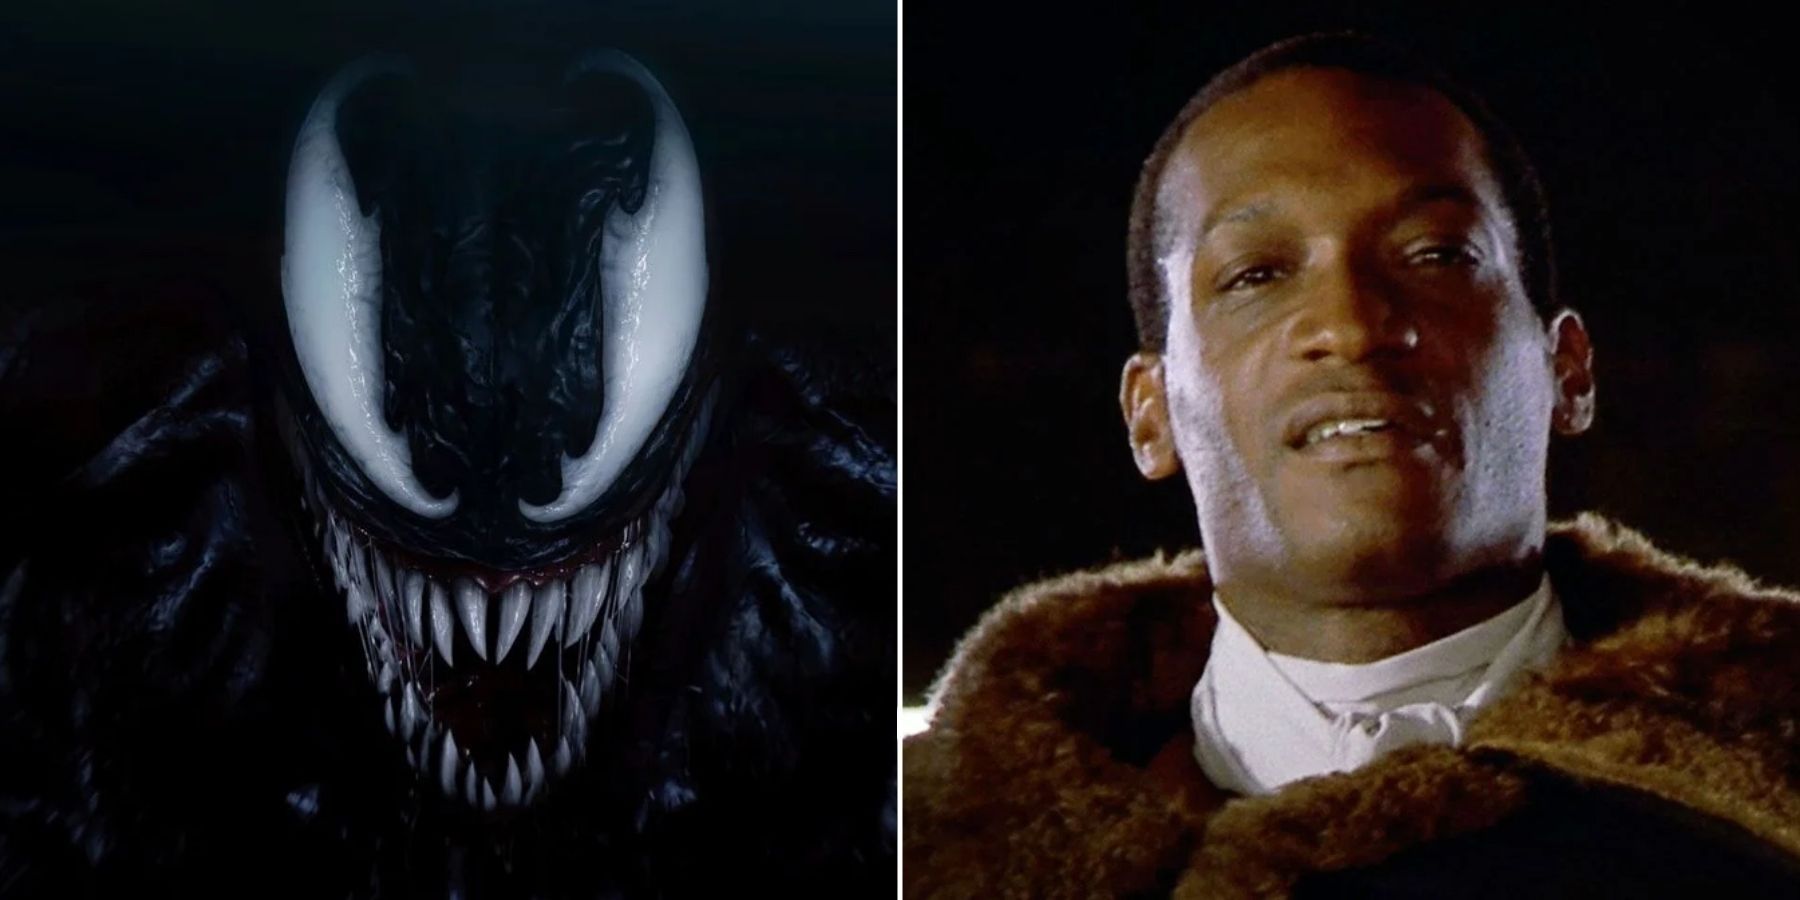 With Tony Todd (Venom's voice actor) citing The Birth of Venom as a story  arc that inspired Spider-Man 2's story, I'm hoping we get the iconic moment  from ASM #300 where he